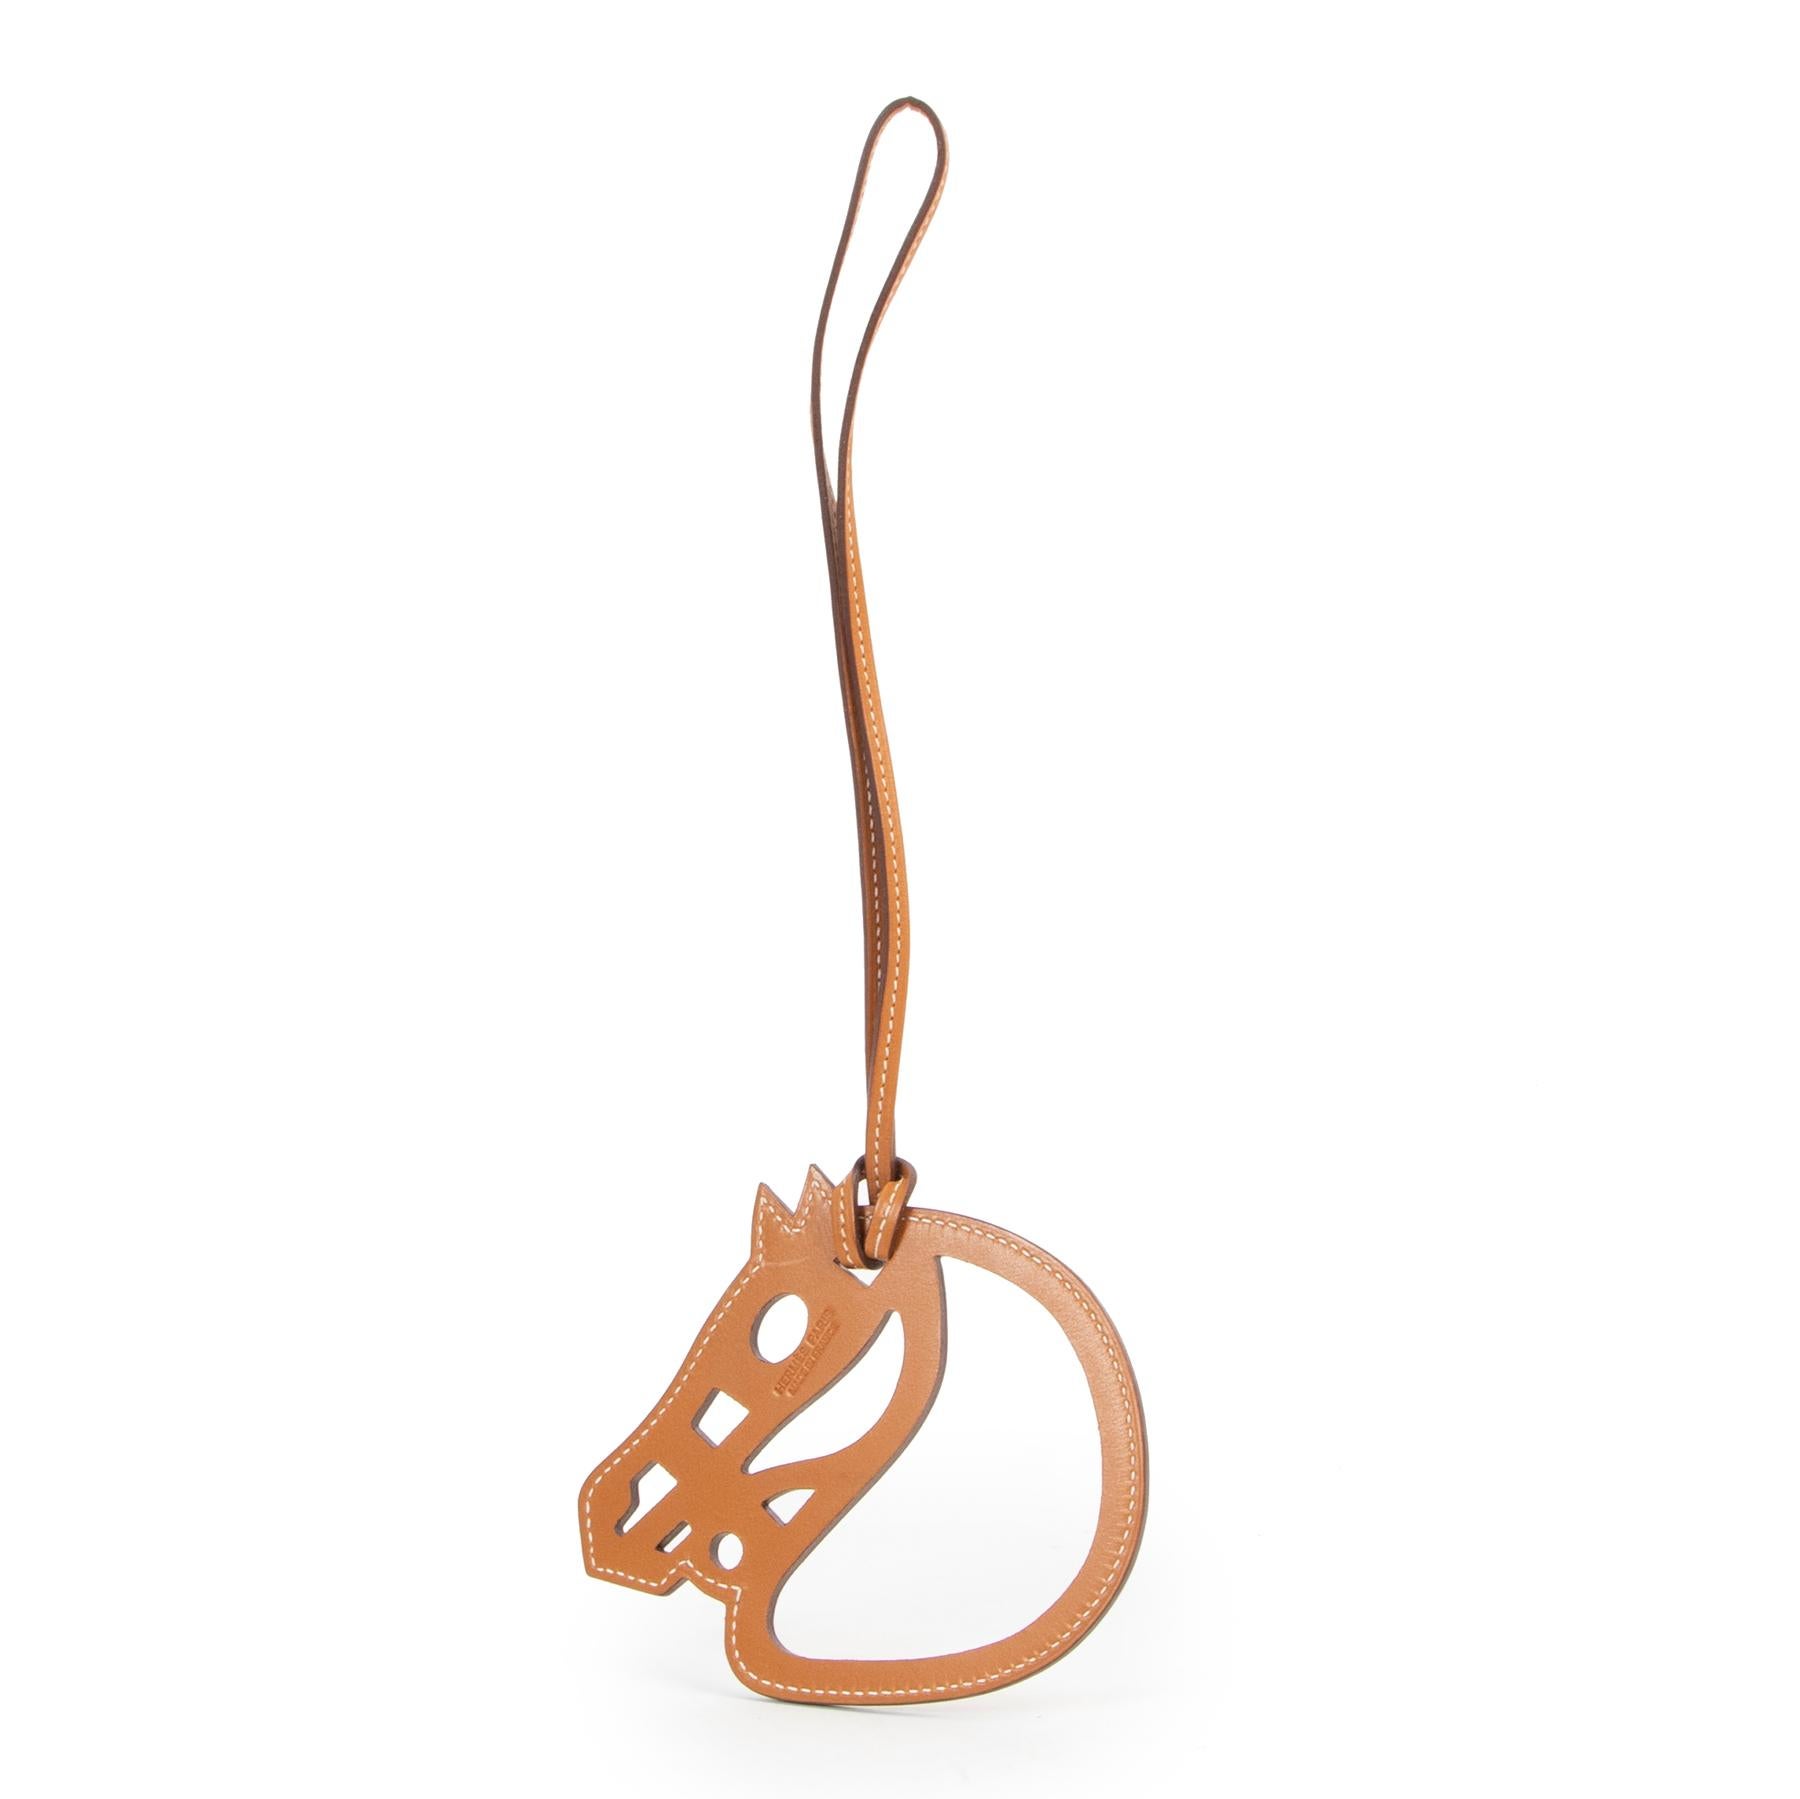 Hermès Paddock Cheval Gold Bag Charm

Spice up your look with this stunning Hermès Paddock Cheval Gold Bag Charm.

Crafted out of smooth leather, this piece will elevate your ensemble.
